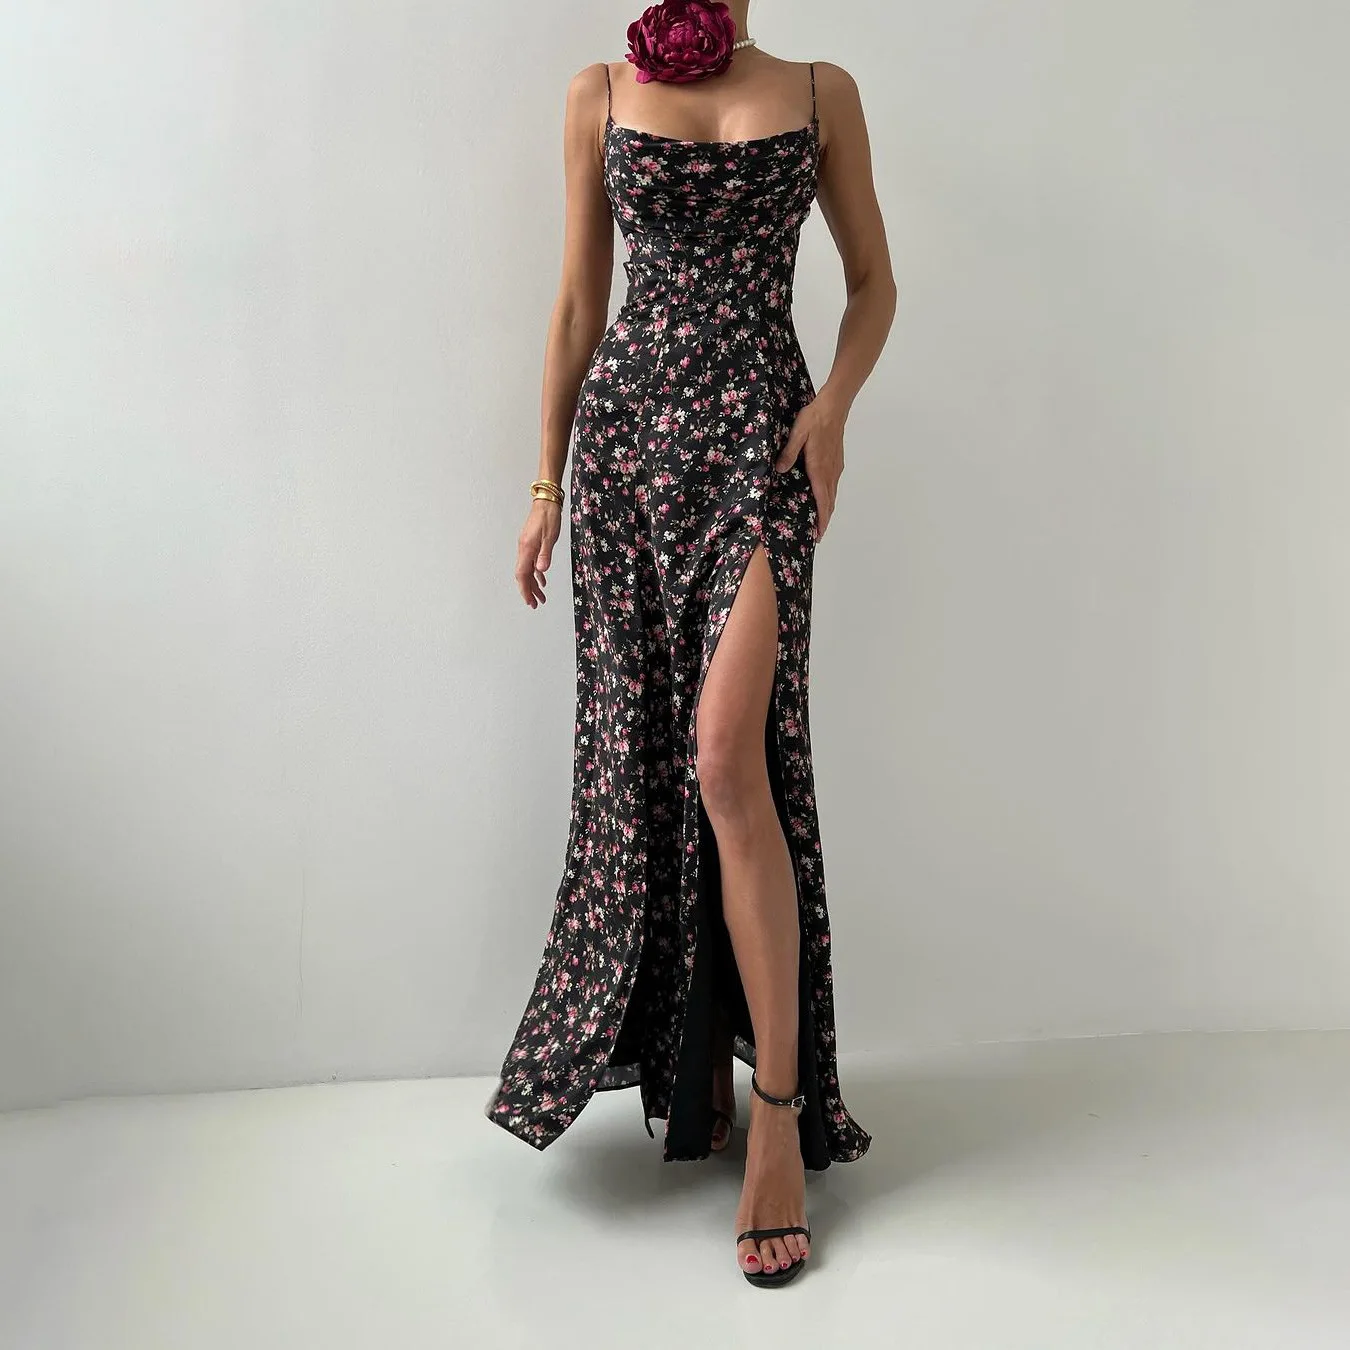 

Backless Sexy Spring Vacation Camisole Dress Spicy Girls With Half Open Legs And Floral Design, Long Skirt For Women